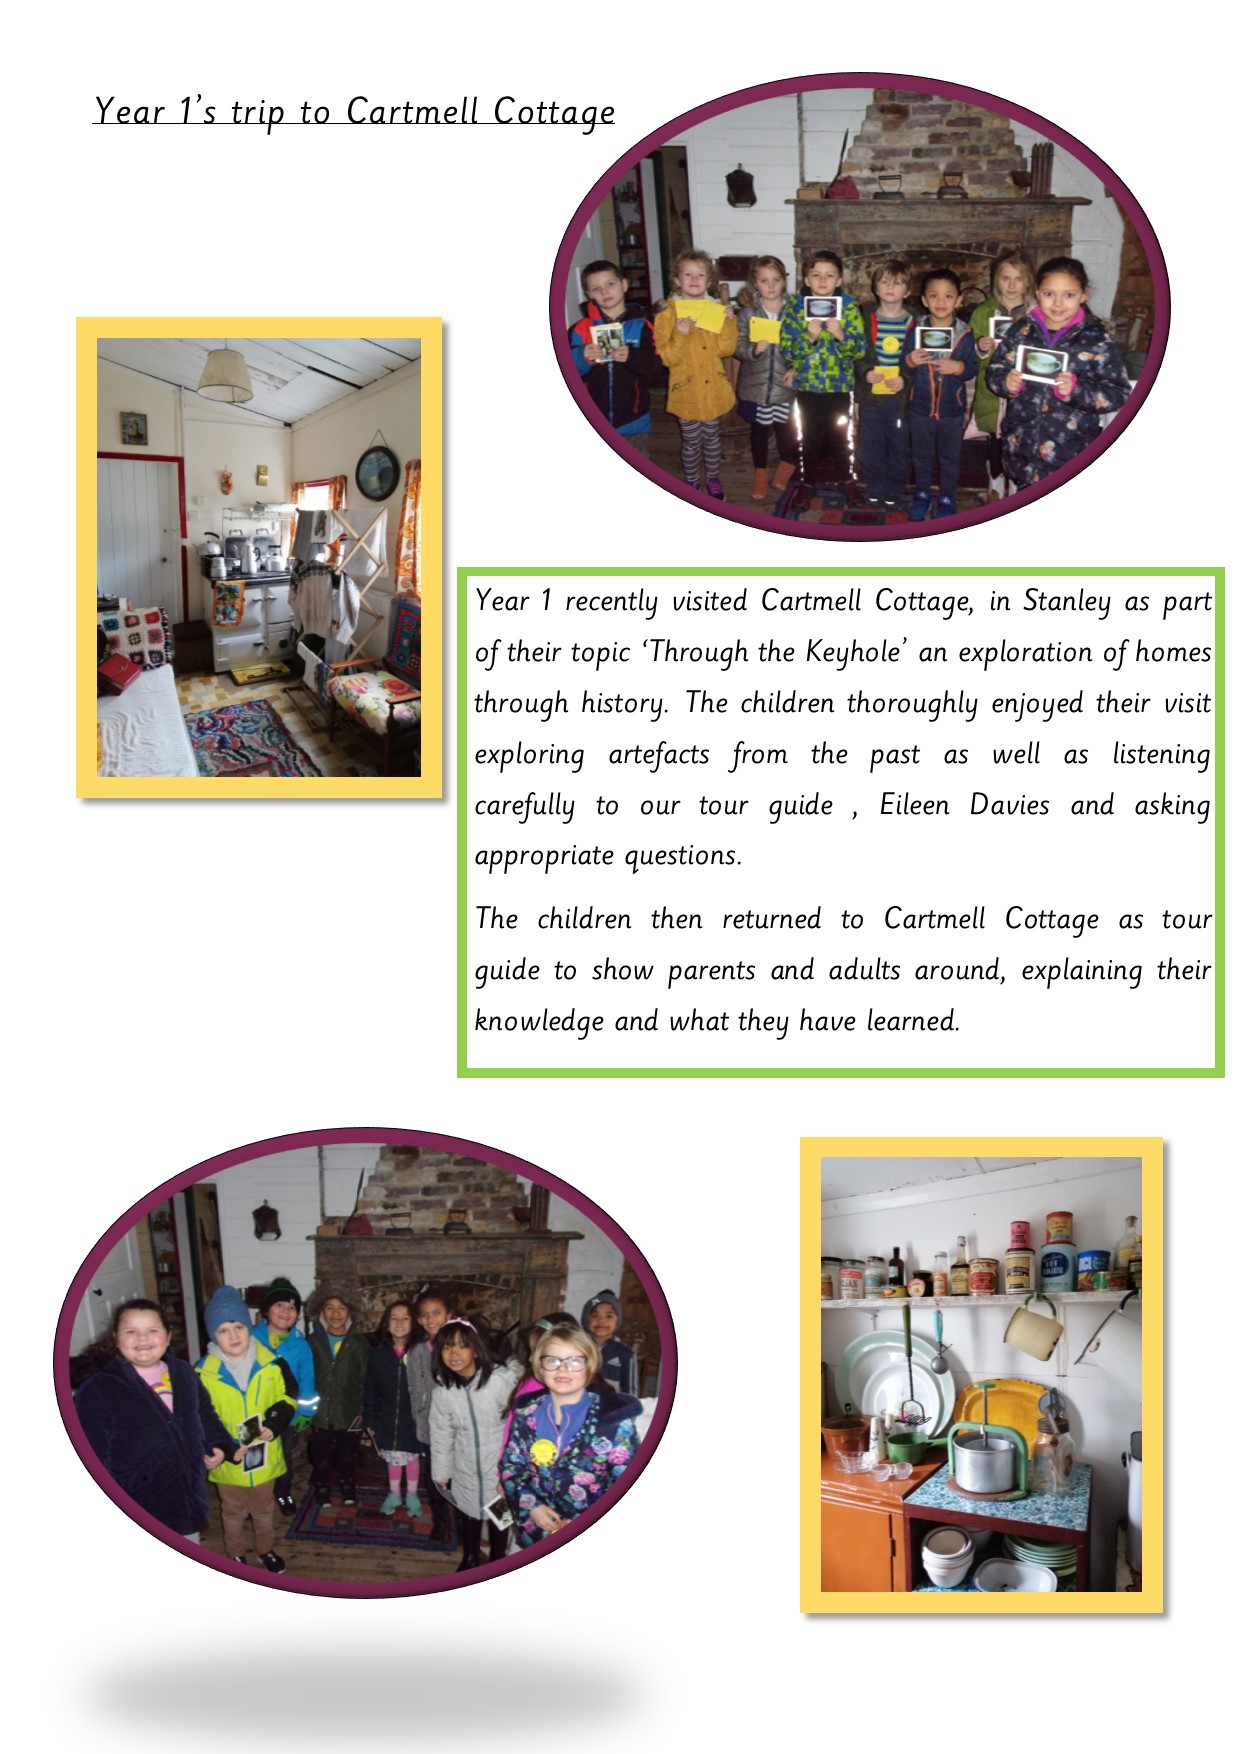 year 1 trip to Cartmell Cottage